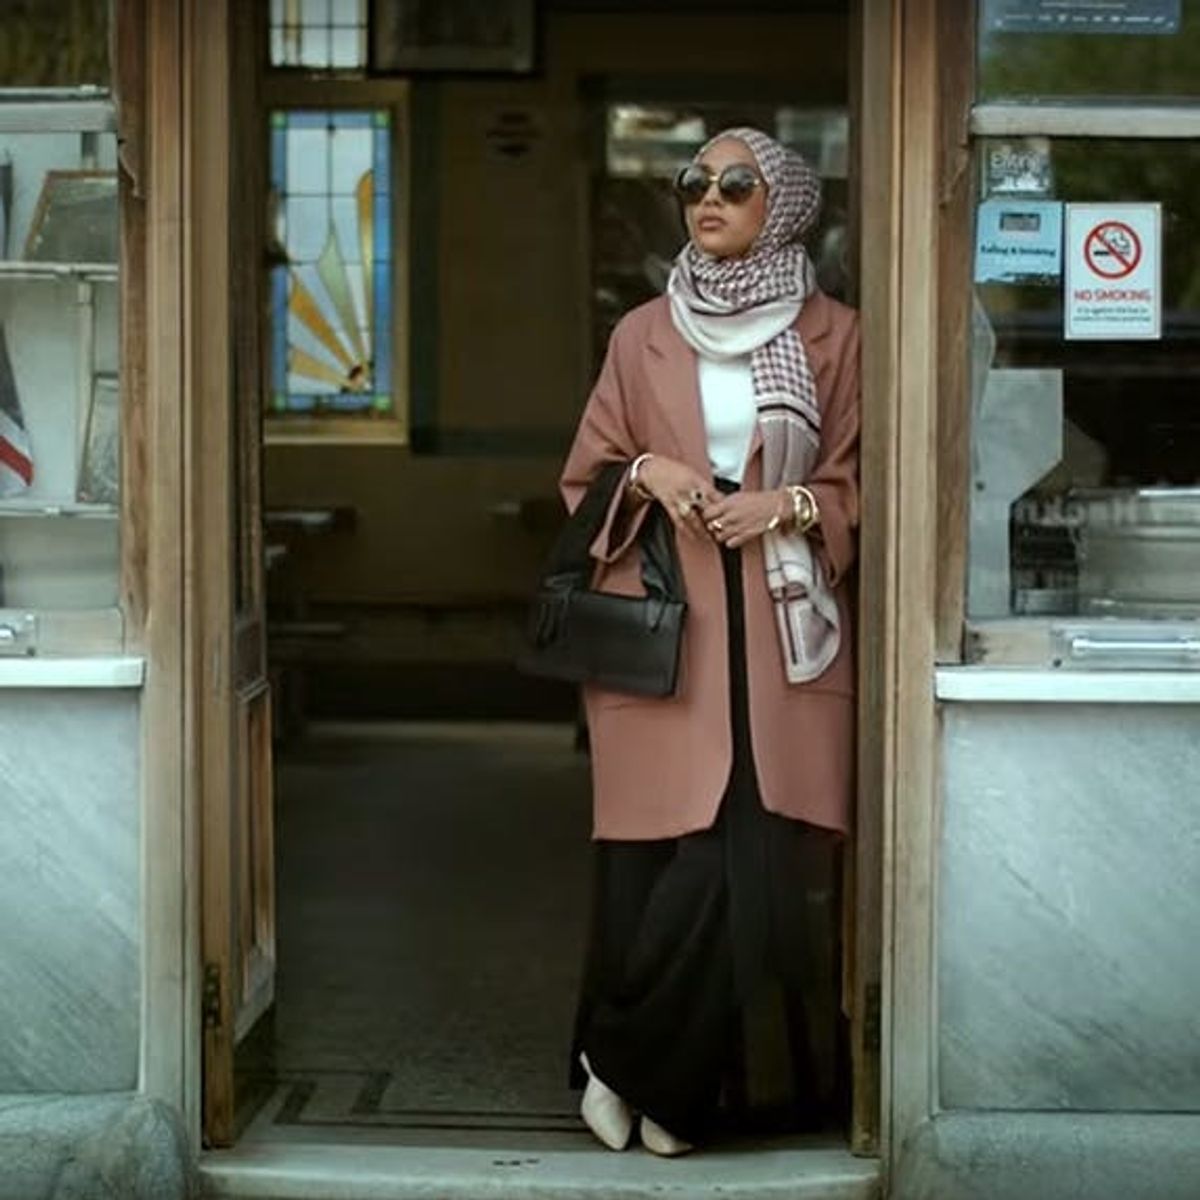 Why H&M’s New Campaign Featuring a Muslim Model Wearing a Hijab Is Making Headlines